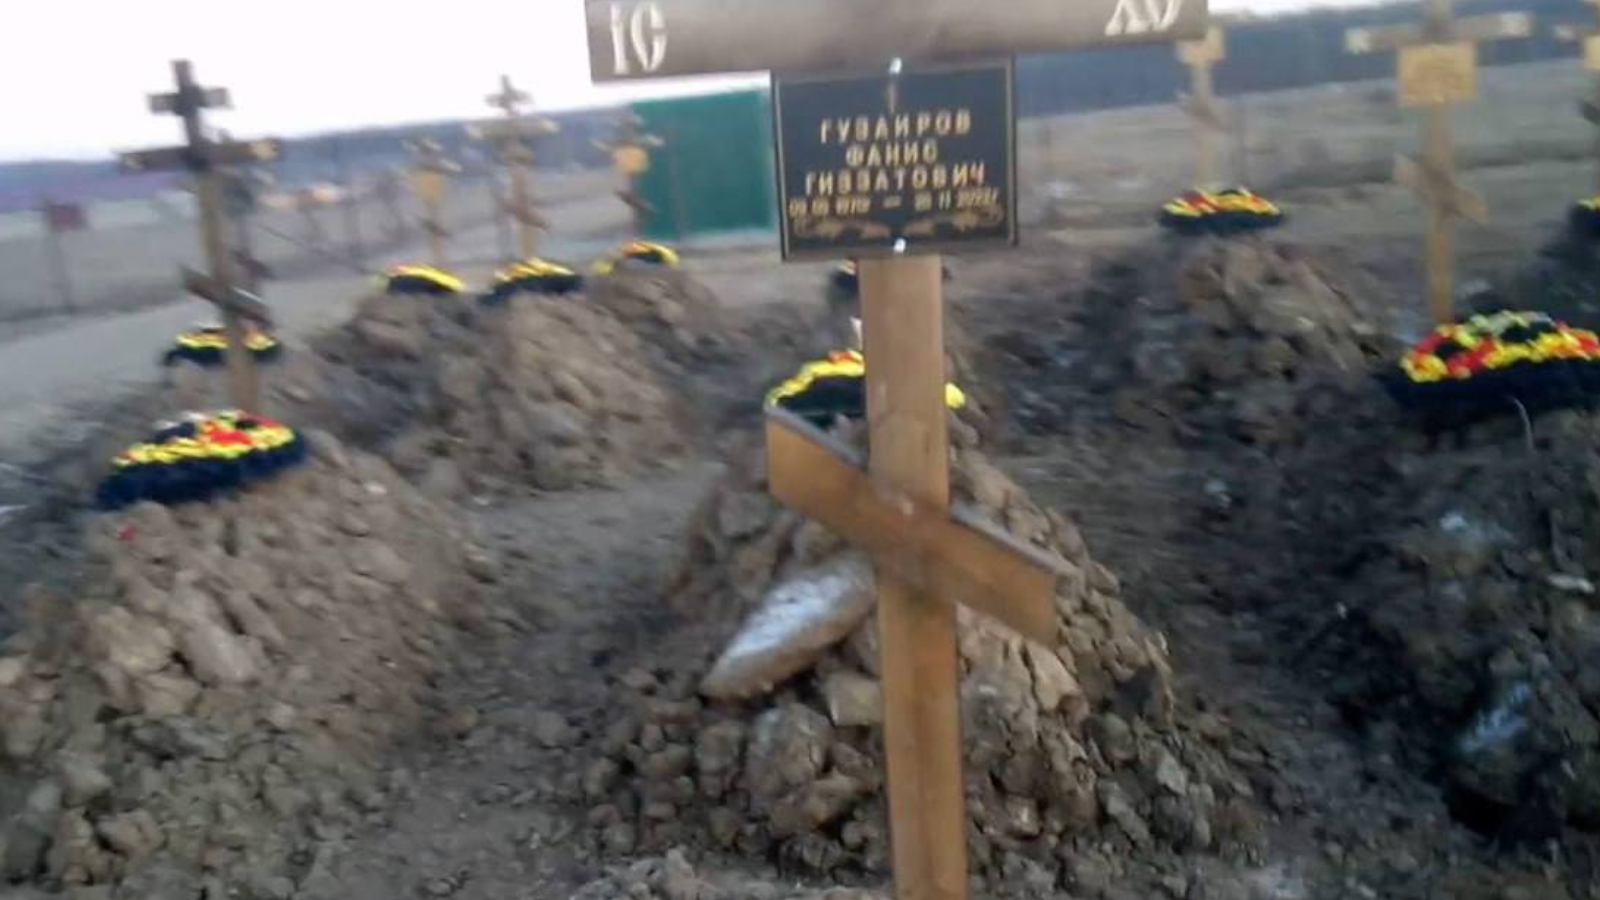 Natives of Bashkortostan who died in the war are buried under crosses